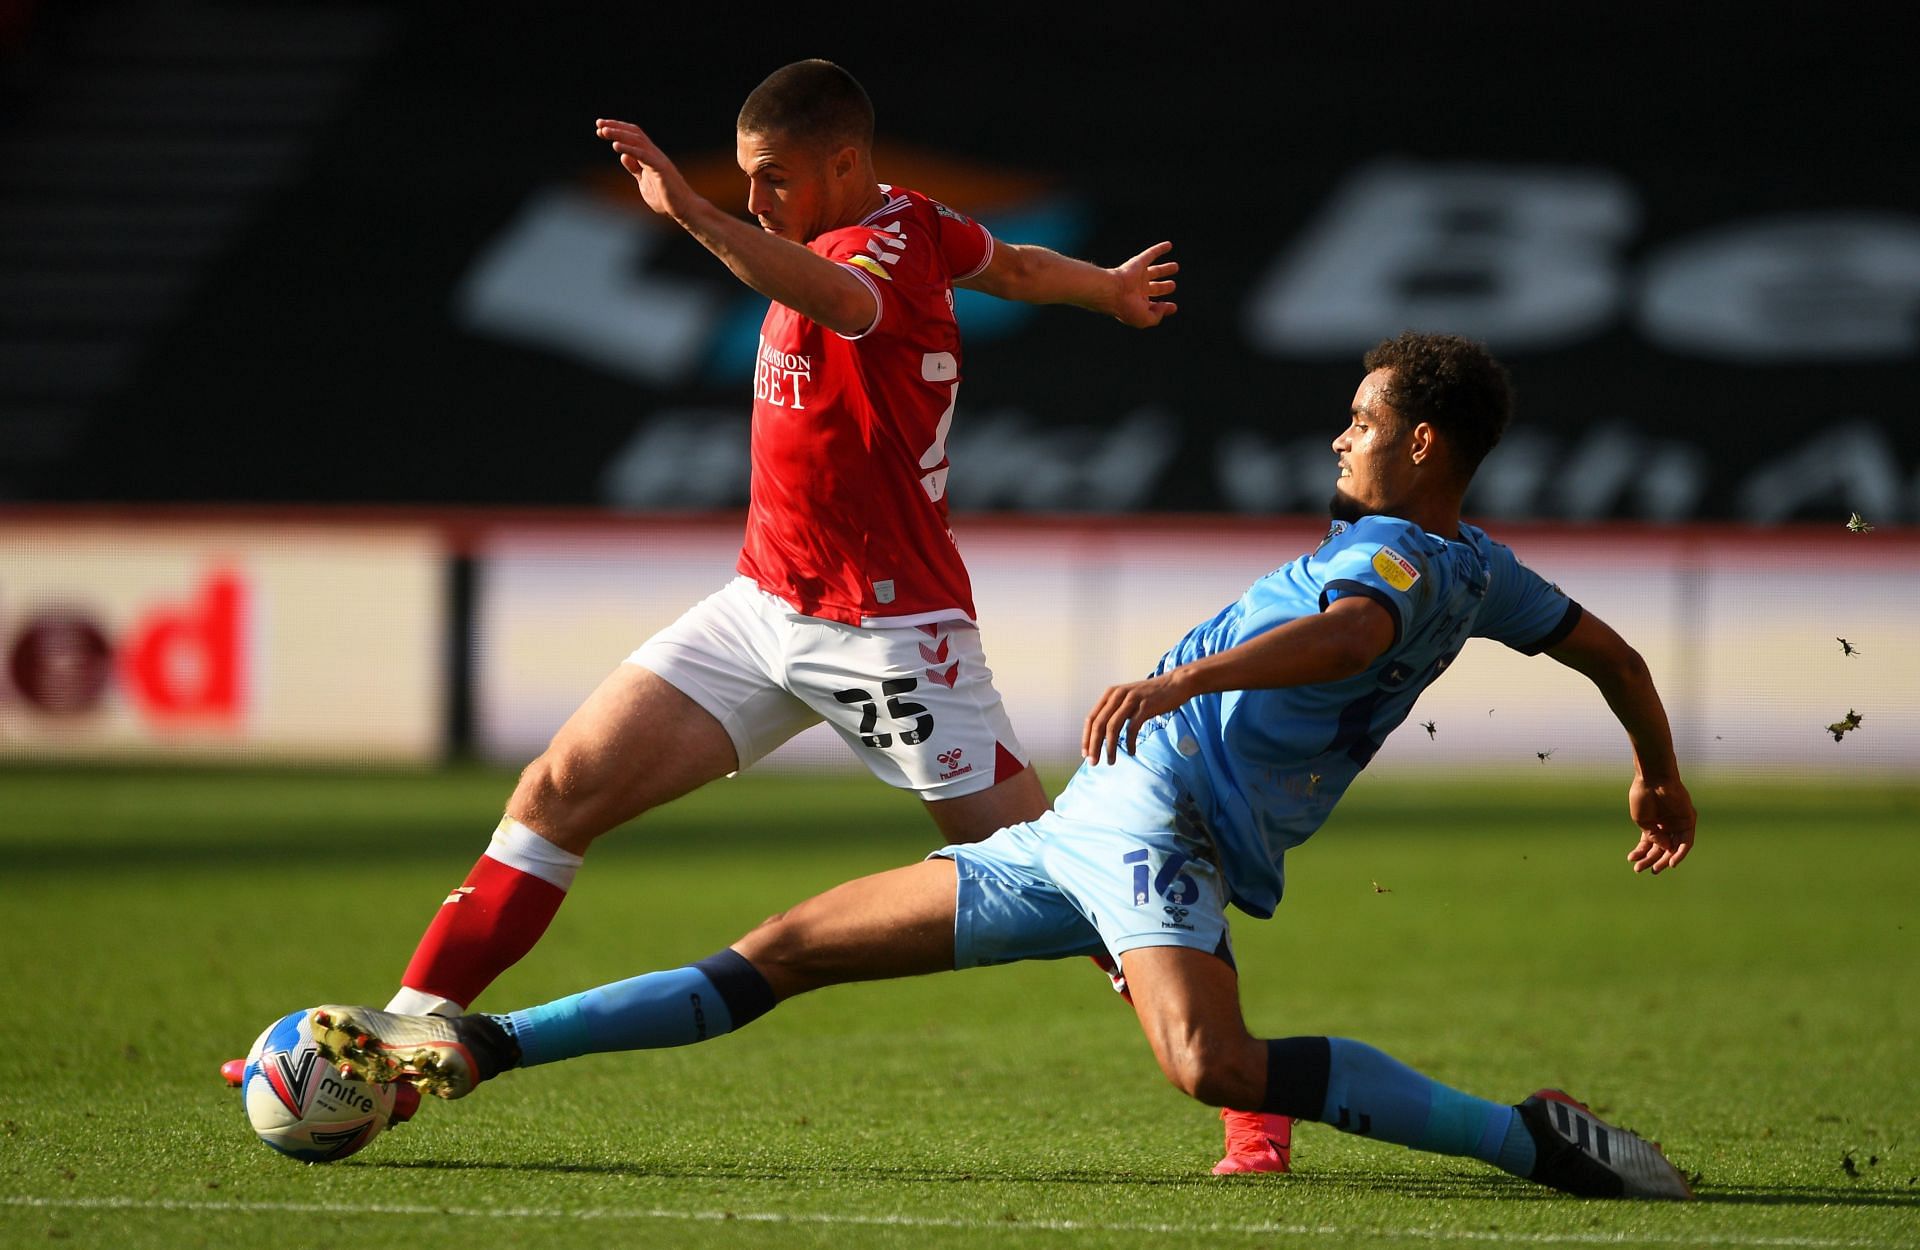 Bristol City play host to Coventry City on Tuesday